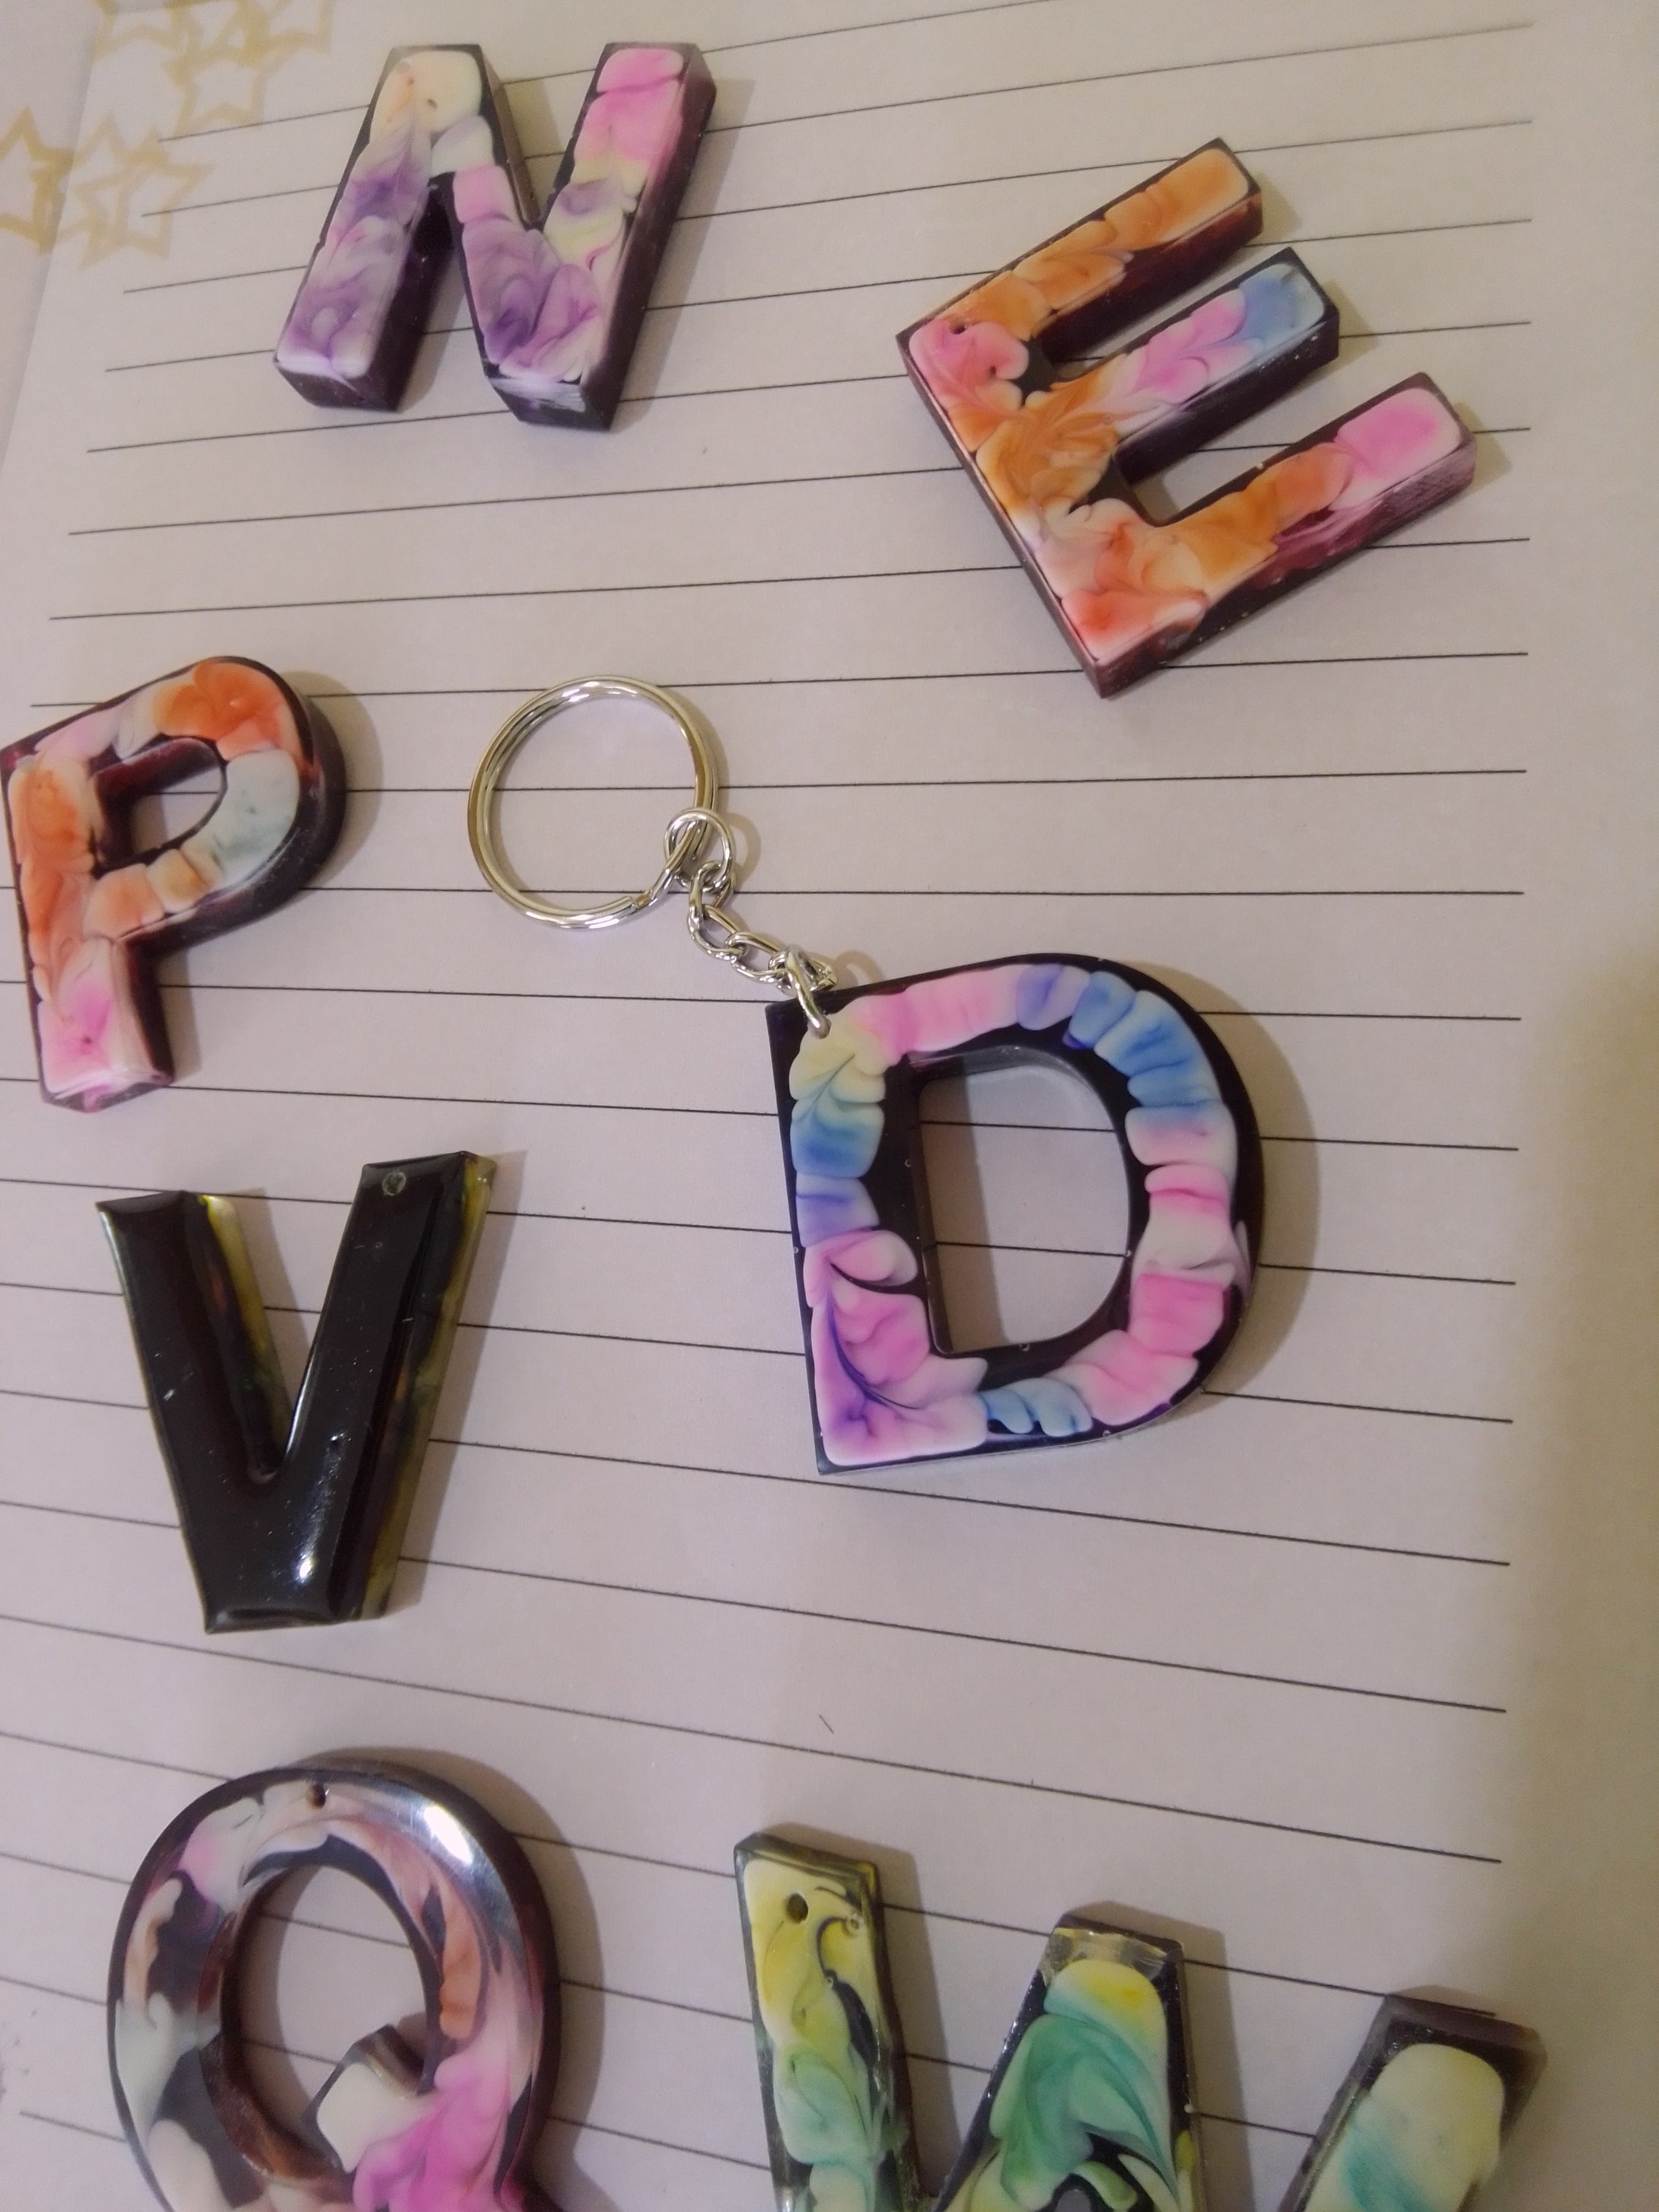 volcanic ash and resin letter keyring decorated with alcohol ink